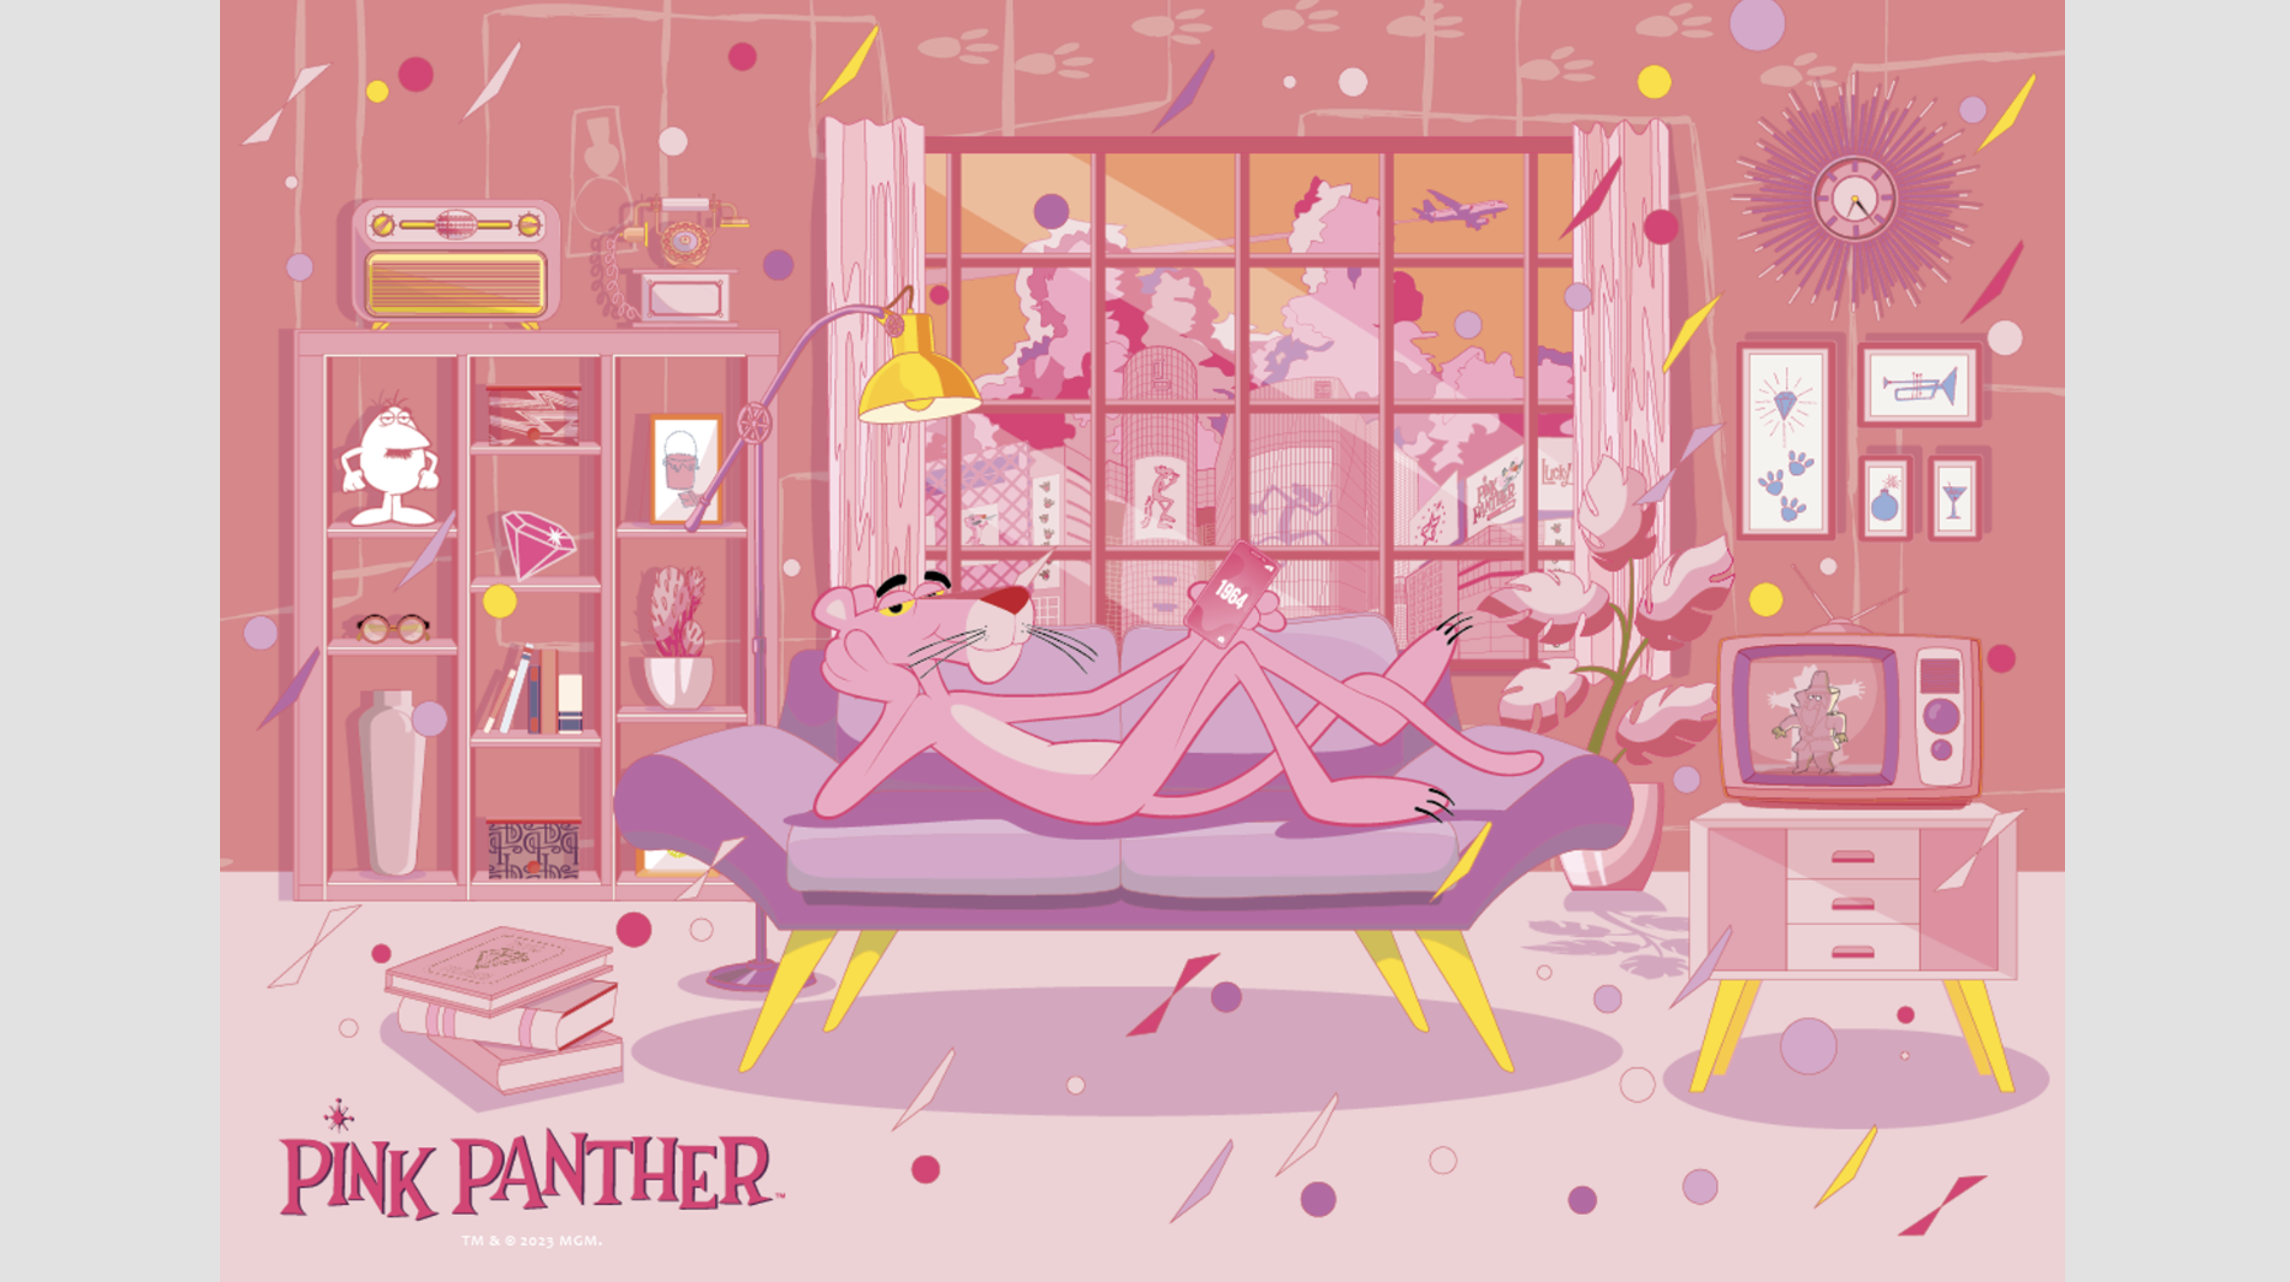 Geek Pictures acquires domestic sublicense right for MGM’s world famous character, the Pink Panther!